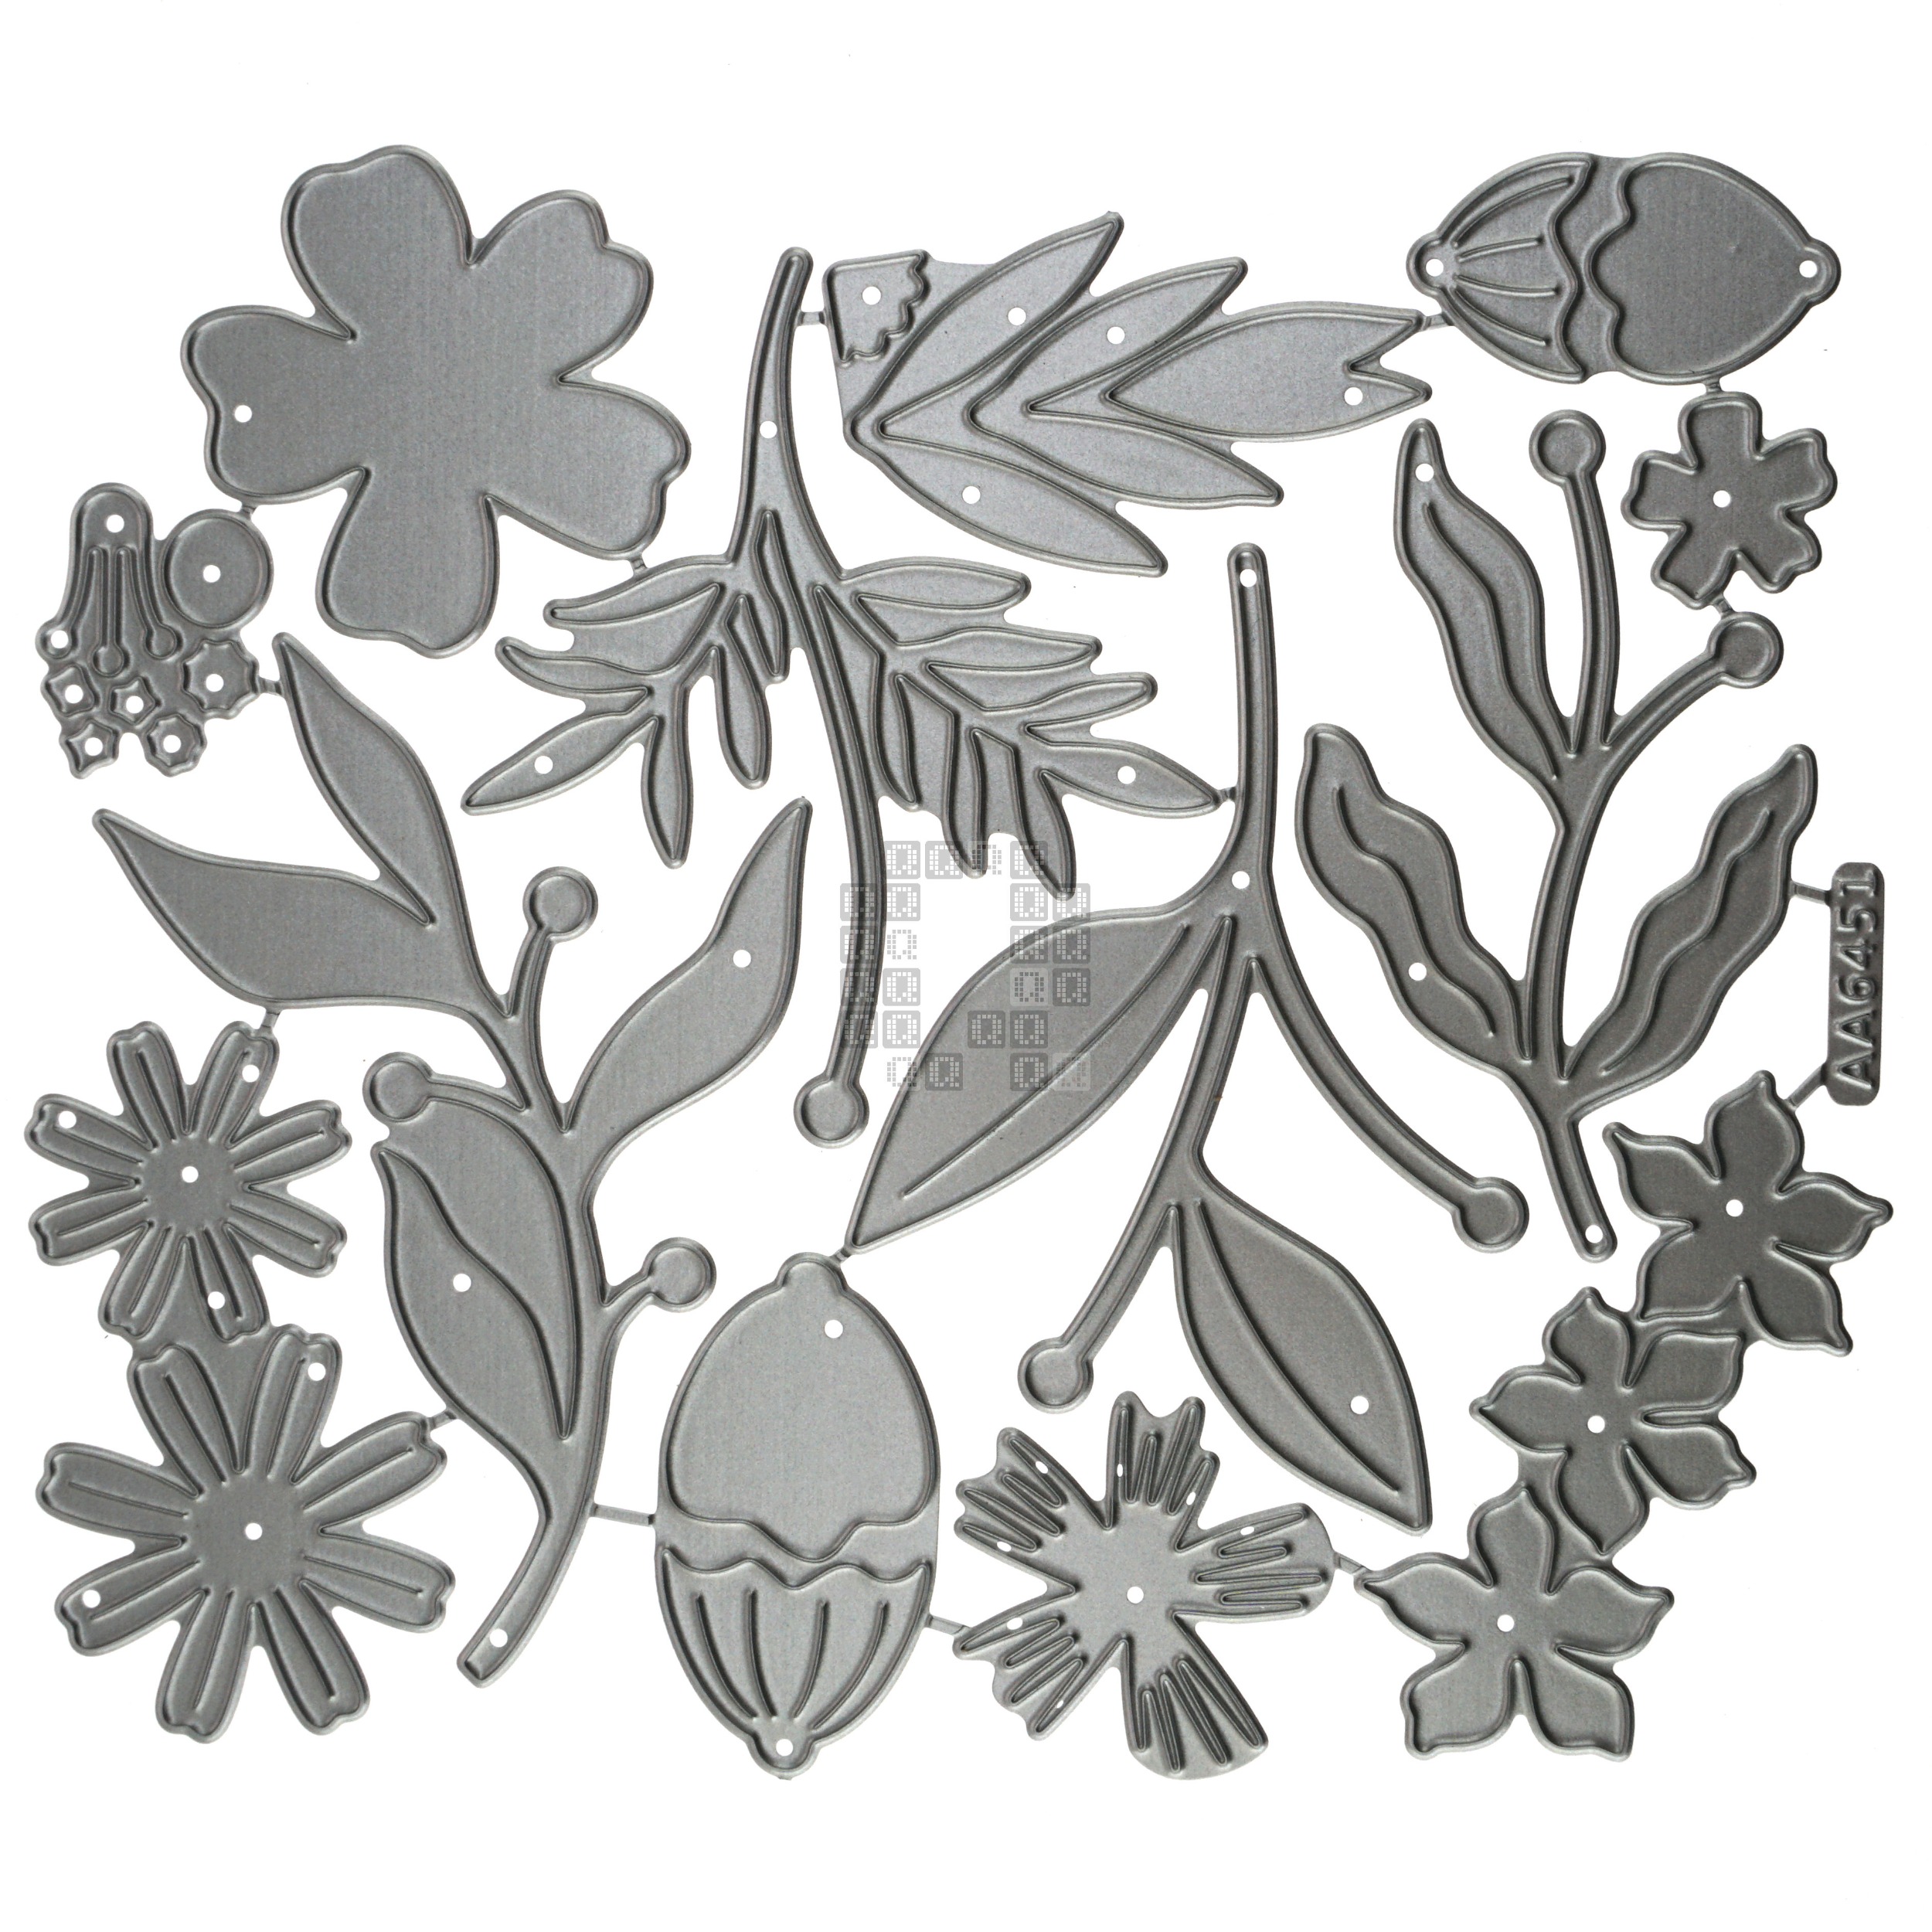 13-Piece Flowers, Buds, Stems and Leaves Metal Cutting Die Set